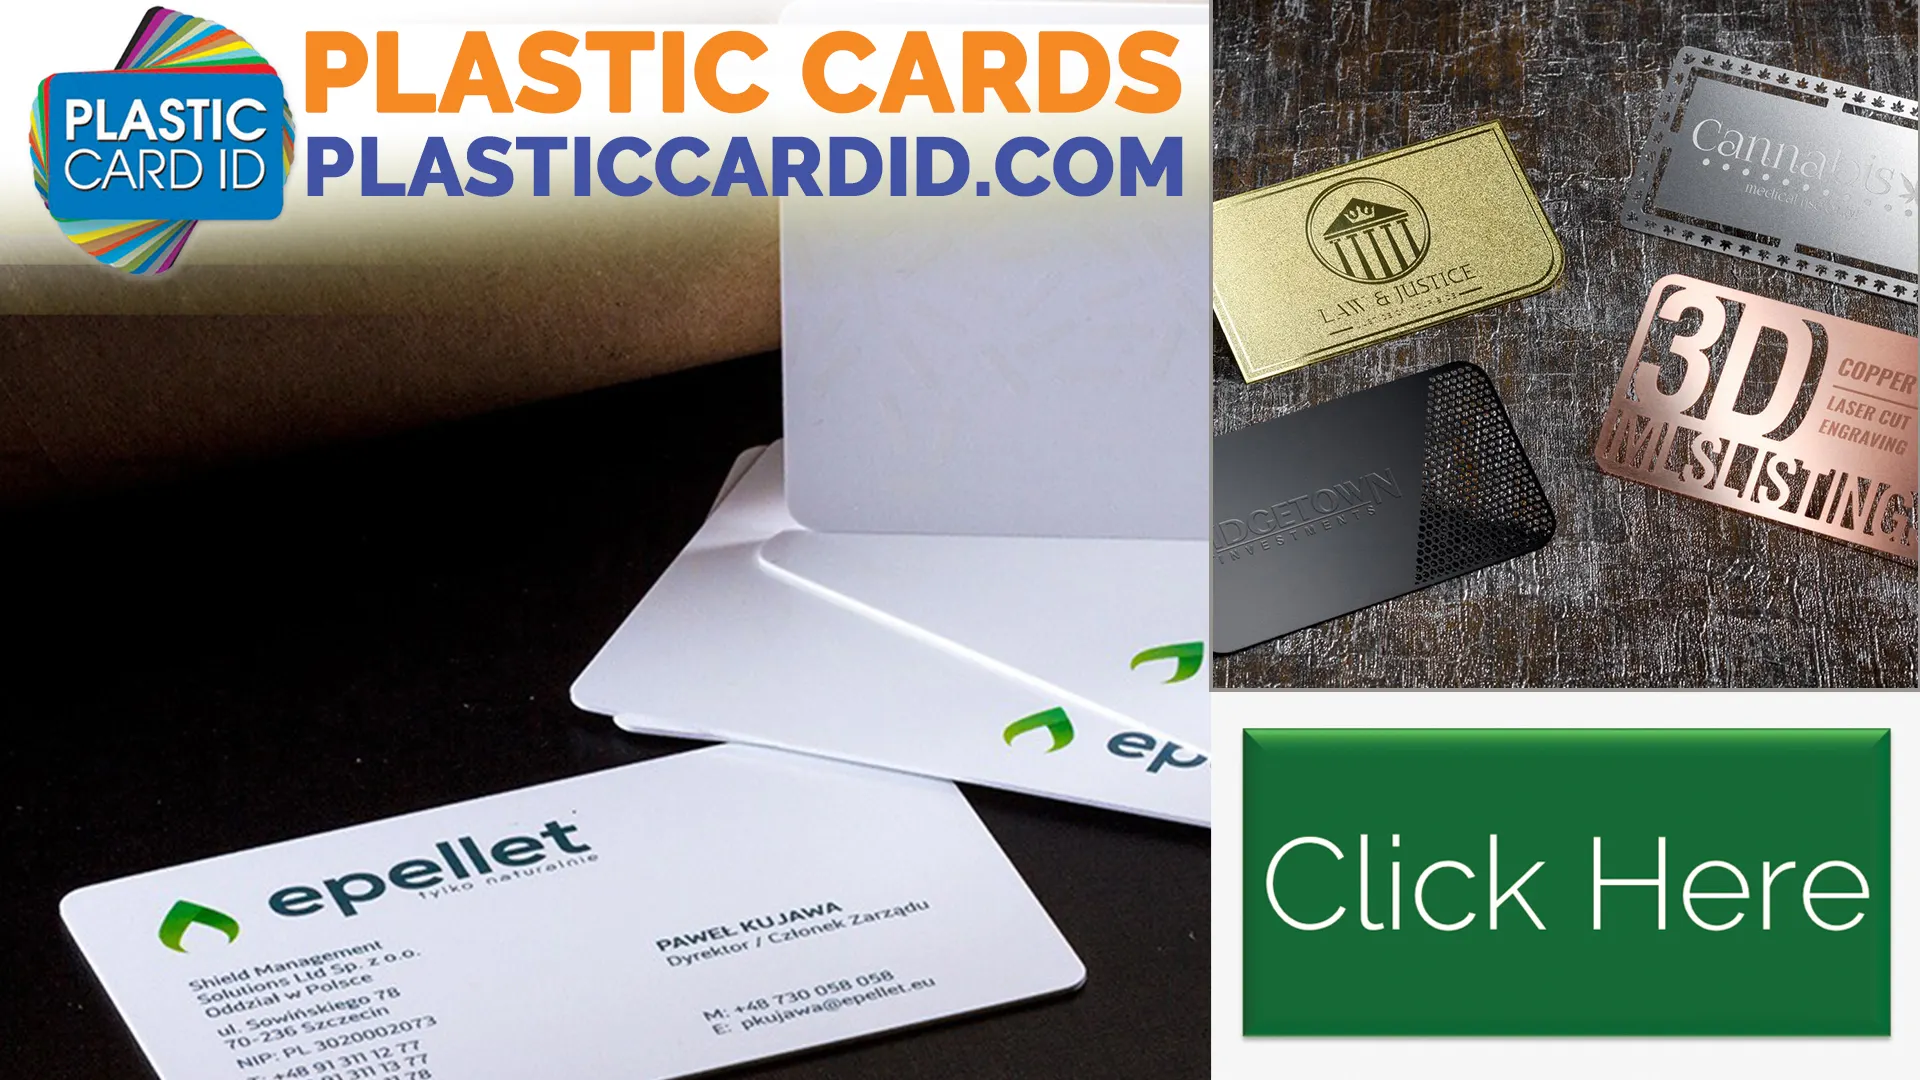 Plastic Card ID




: Catering to Your Unique Needs